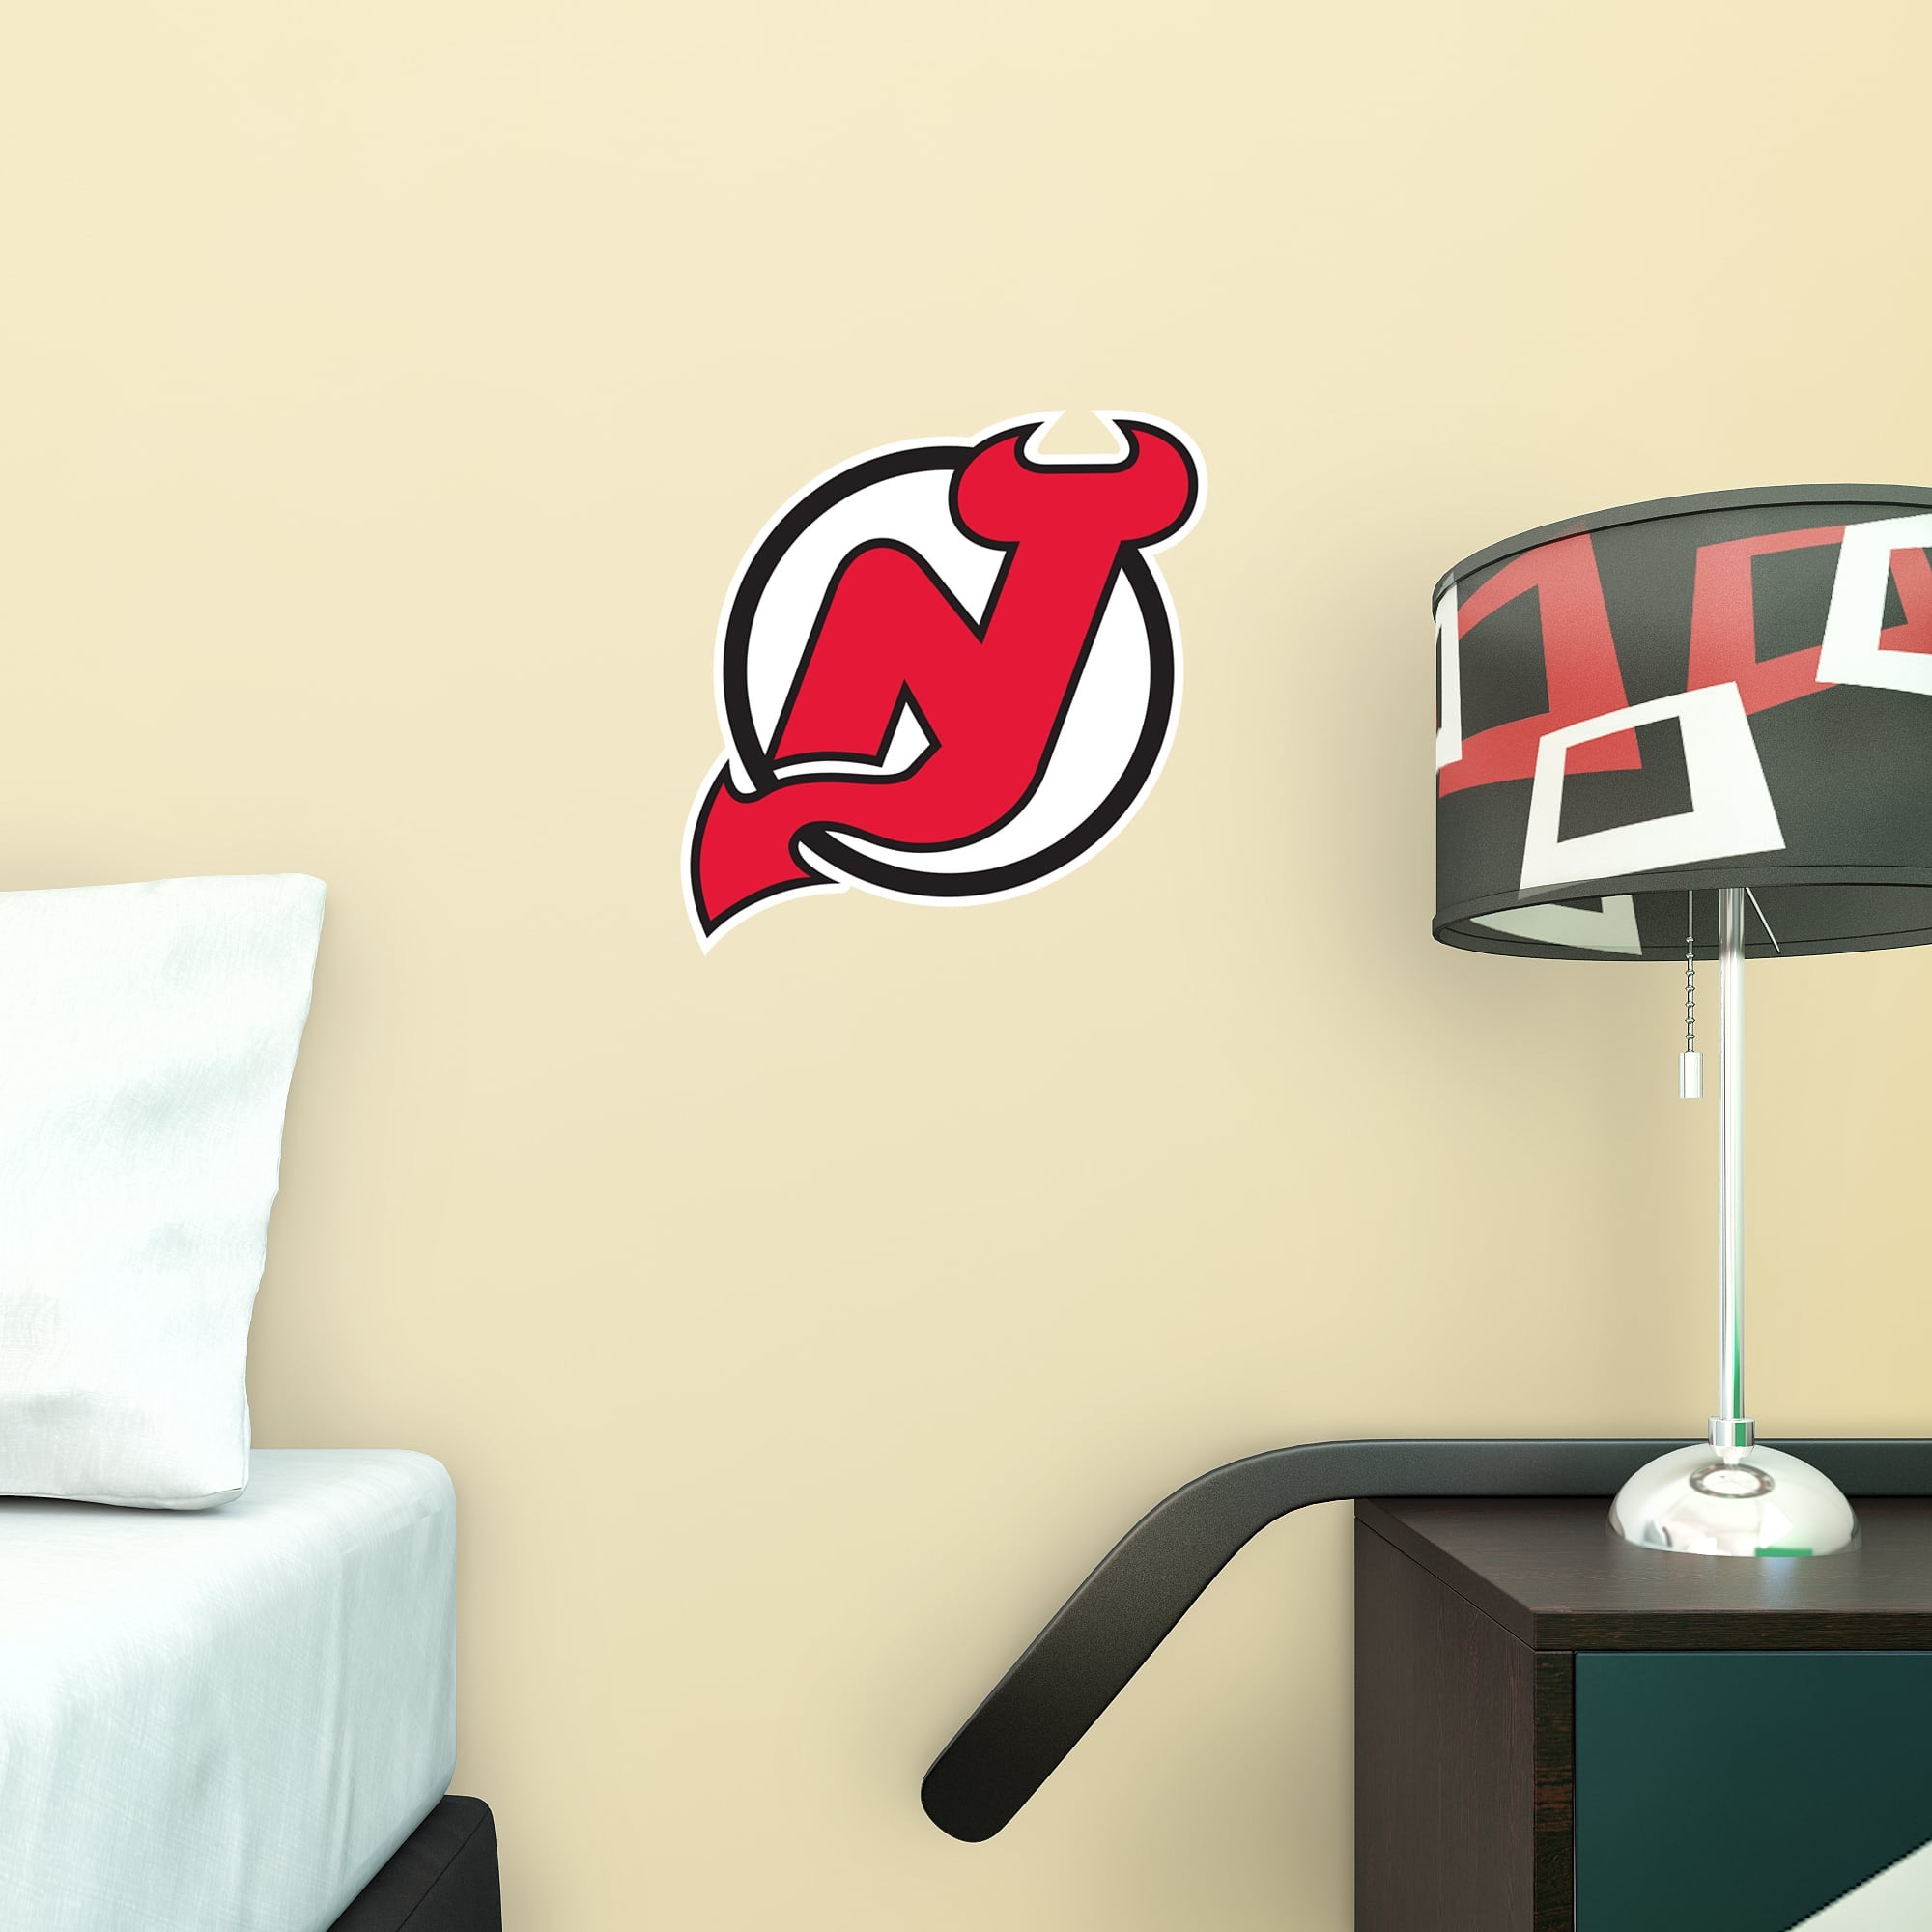 New Jersey Devils: Logo - Officially Licensed NHL Removable Wall Decal Large by Fathead | Vinyl